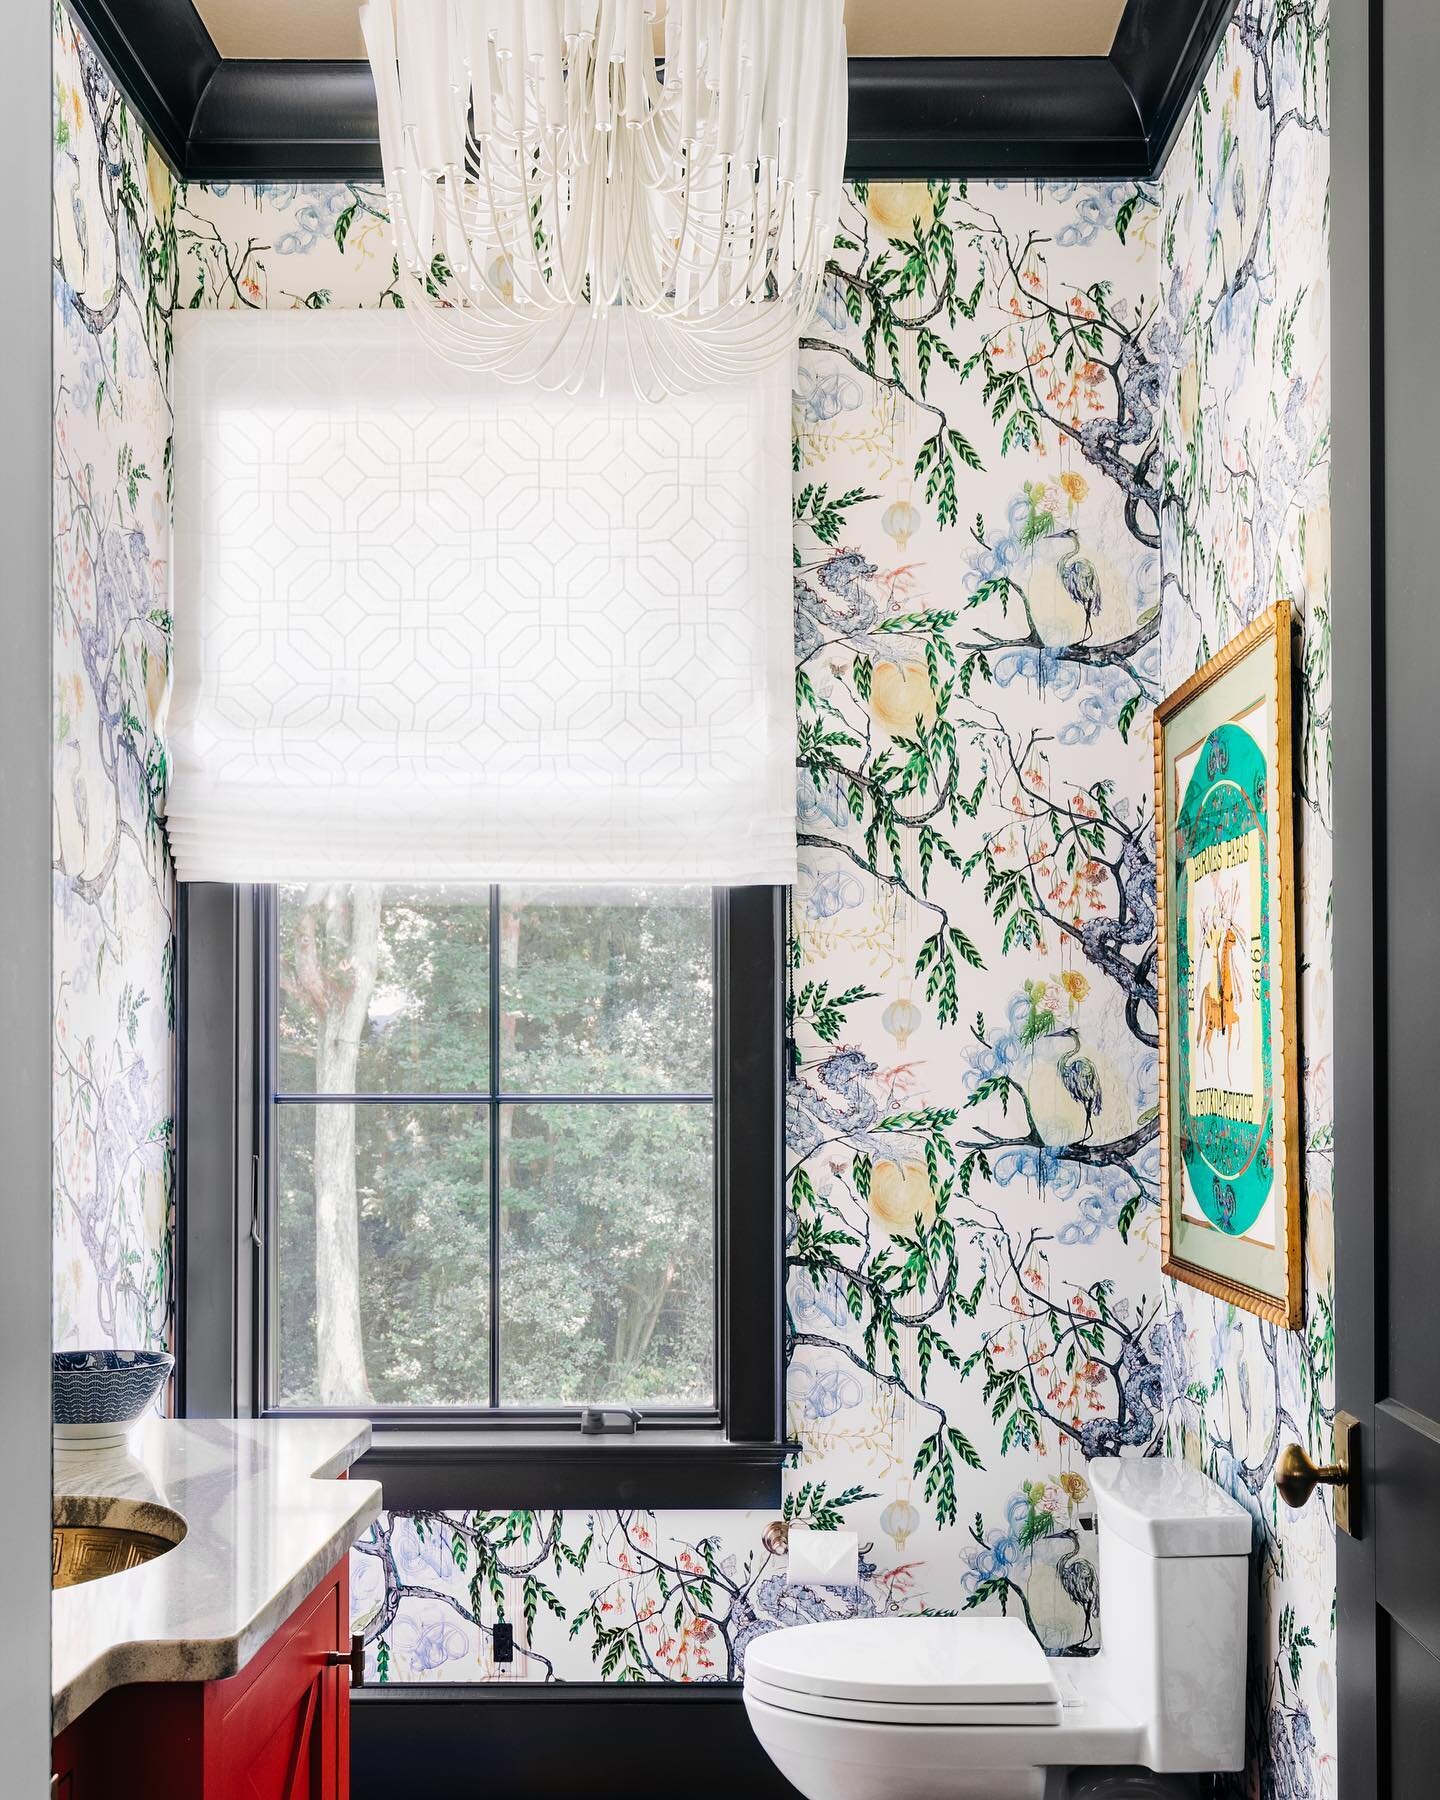 Was trying to pick a few favorites from the most recent @talkgreenville home feature and it turns out I&rsquo;m a sucker for a bold wallpaper moment. 

Shot for @talkgreenville // interior design by @carolinebrackettdesign // art consulting by @evere